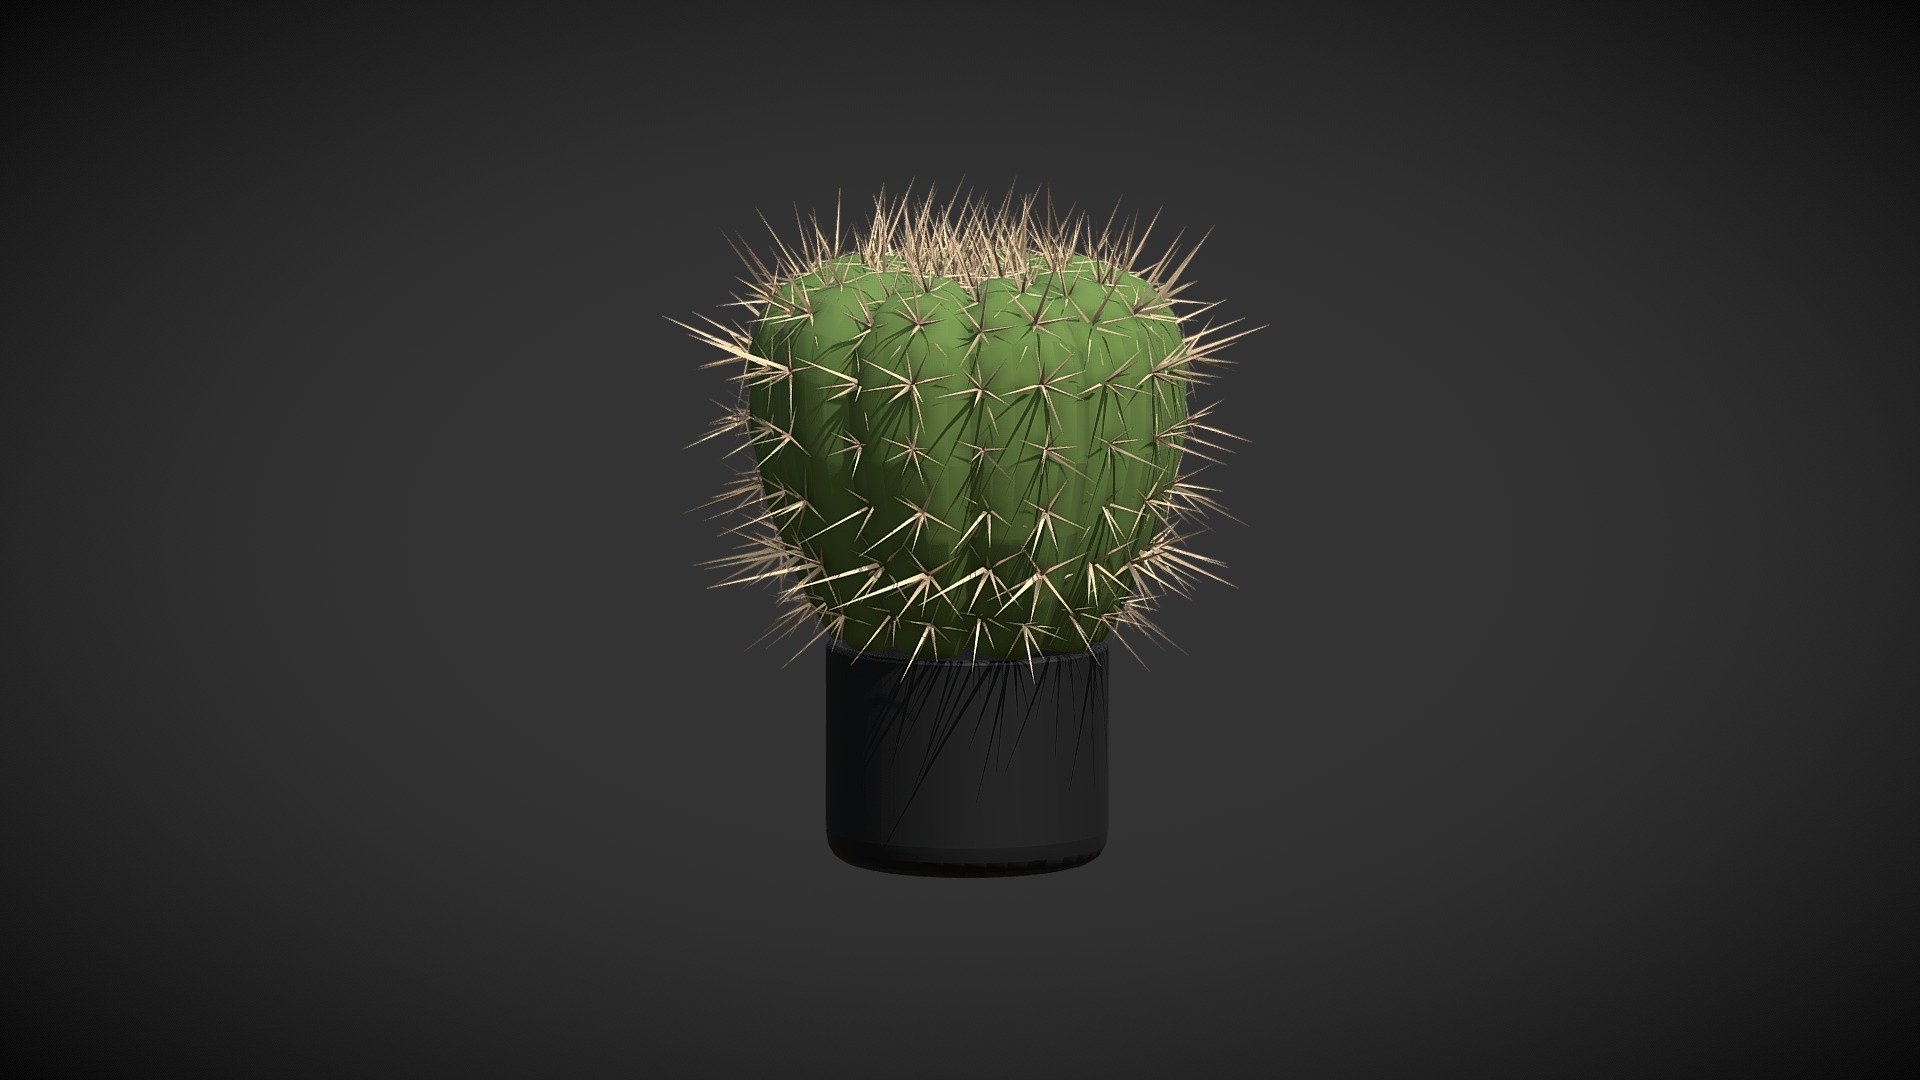 NIce cactus 3D model/assets for any game or animation scene. 